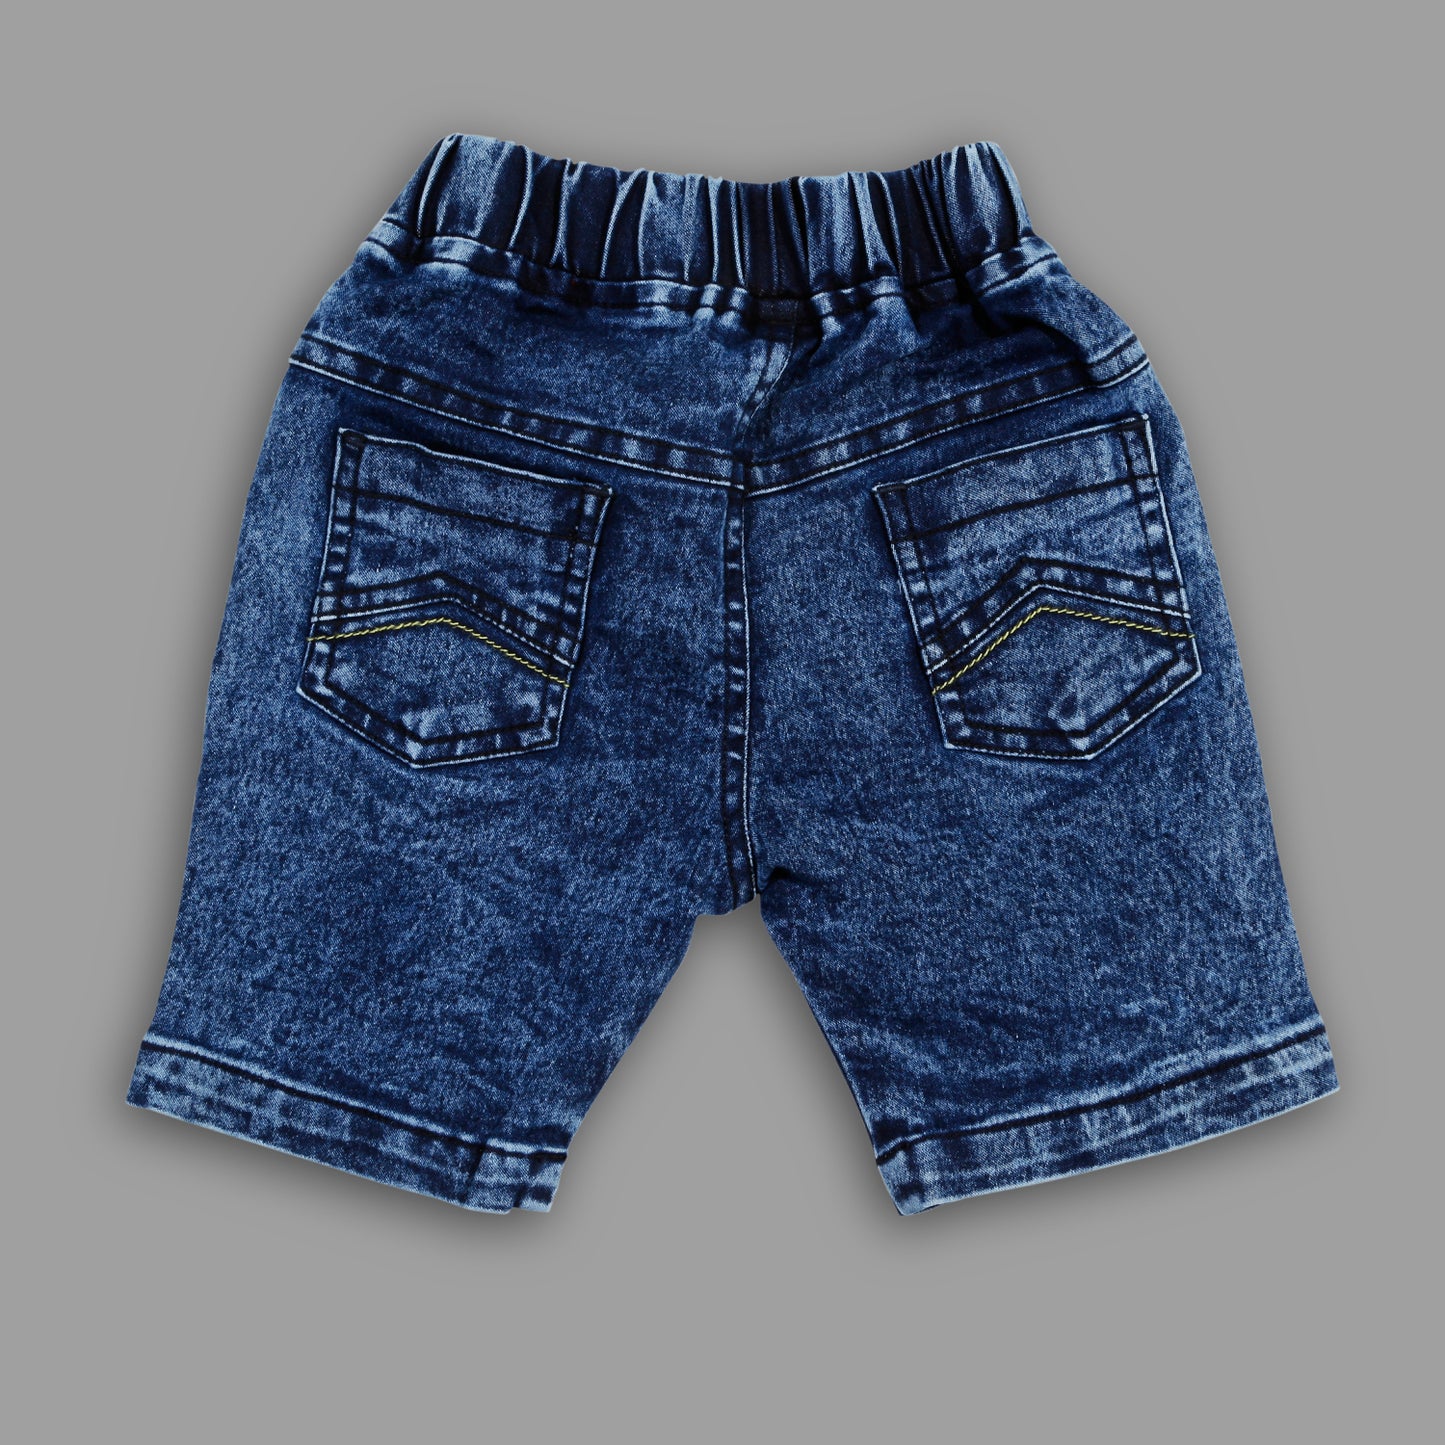 Bad Boys Stylish Casual Outfit with Cotton T-shirt and Denim Bottoms - mashup boys